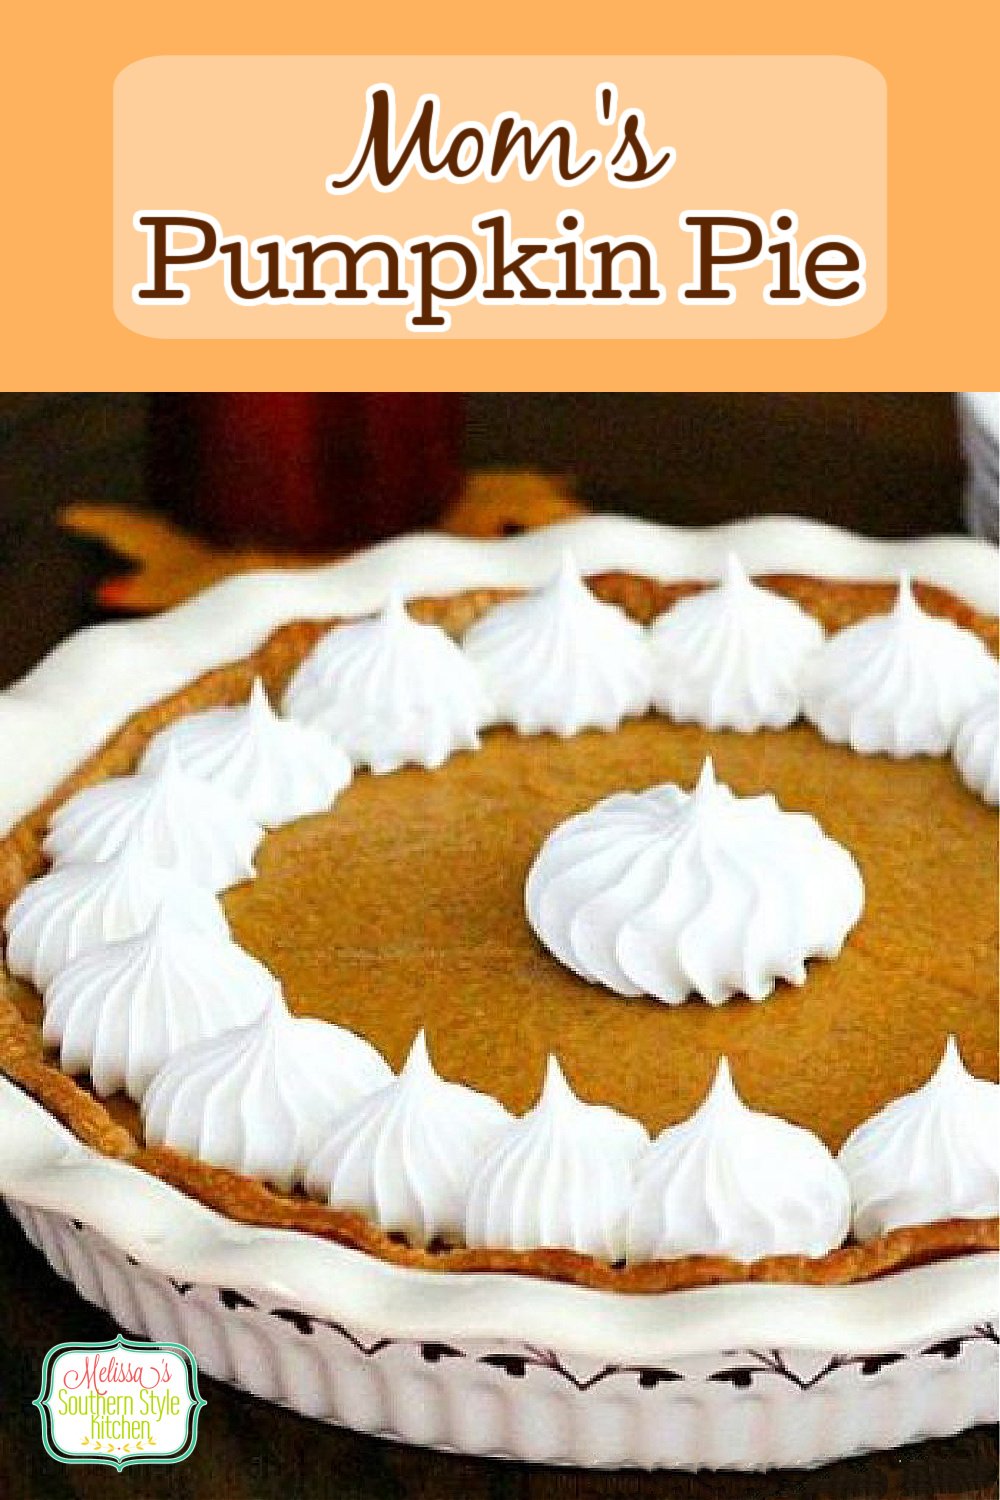 Take the fuss out of desserts this thanksgiving with Mom's Pumpkin Pie that features a filling made on the stovetop #pumpkinpie #bestpumpkinpie #easypumpkinpie #southernfood #thanksgivingrecipes #holidaybaking #fallrecipes #pumpkin #pierecipes #southernrecipes